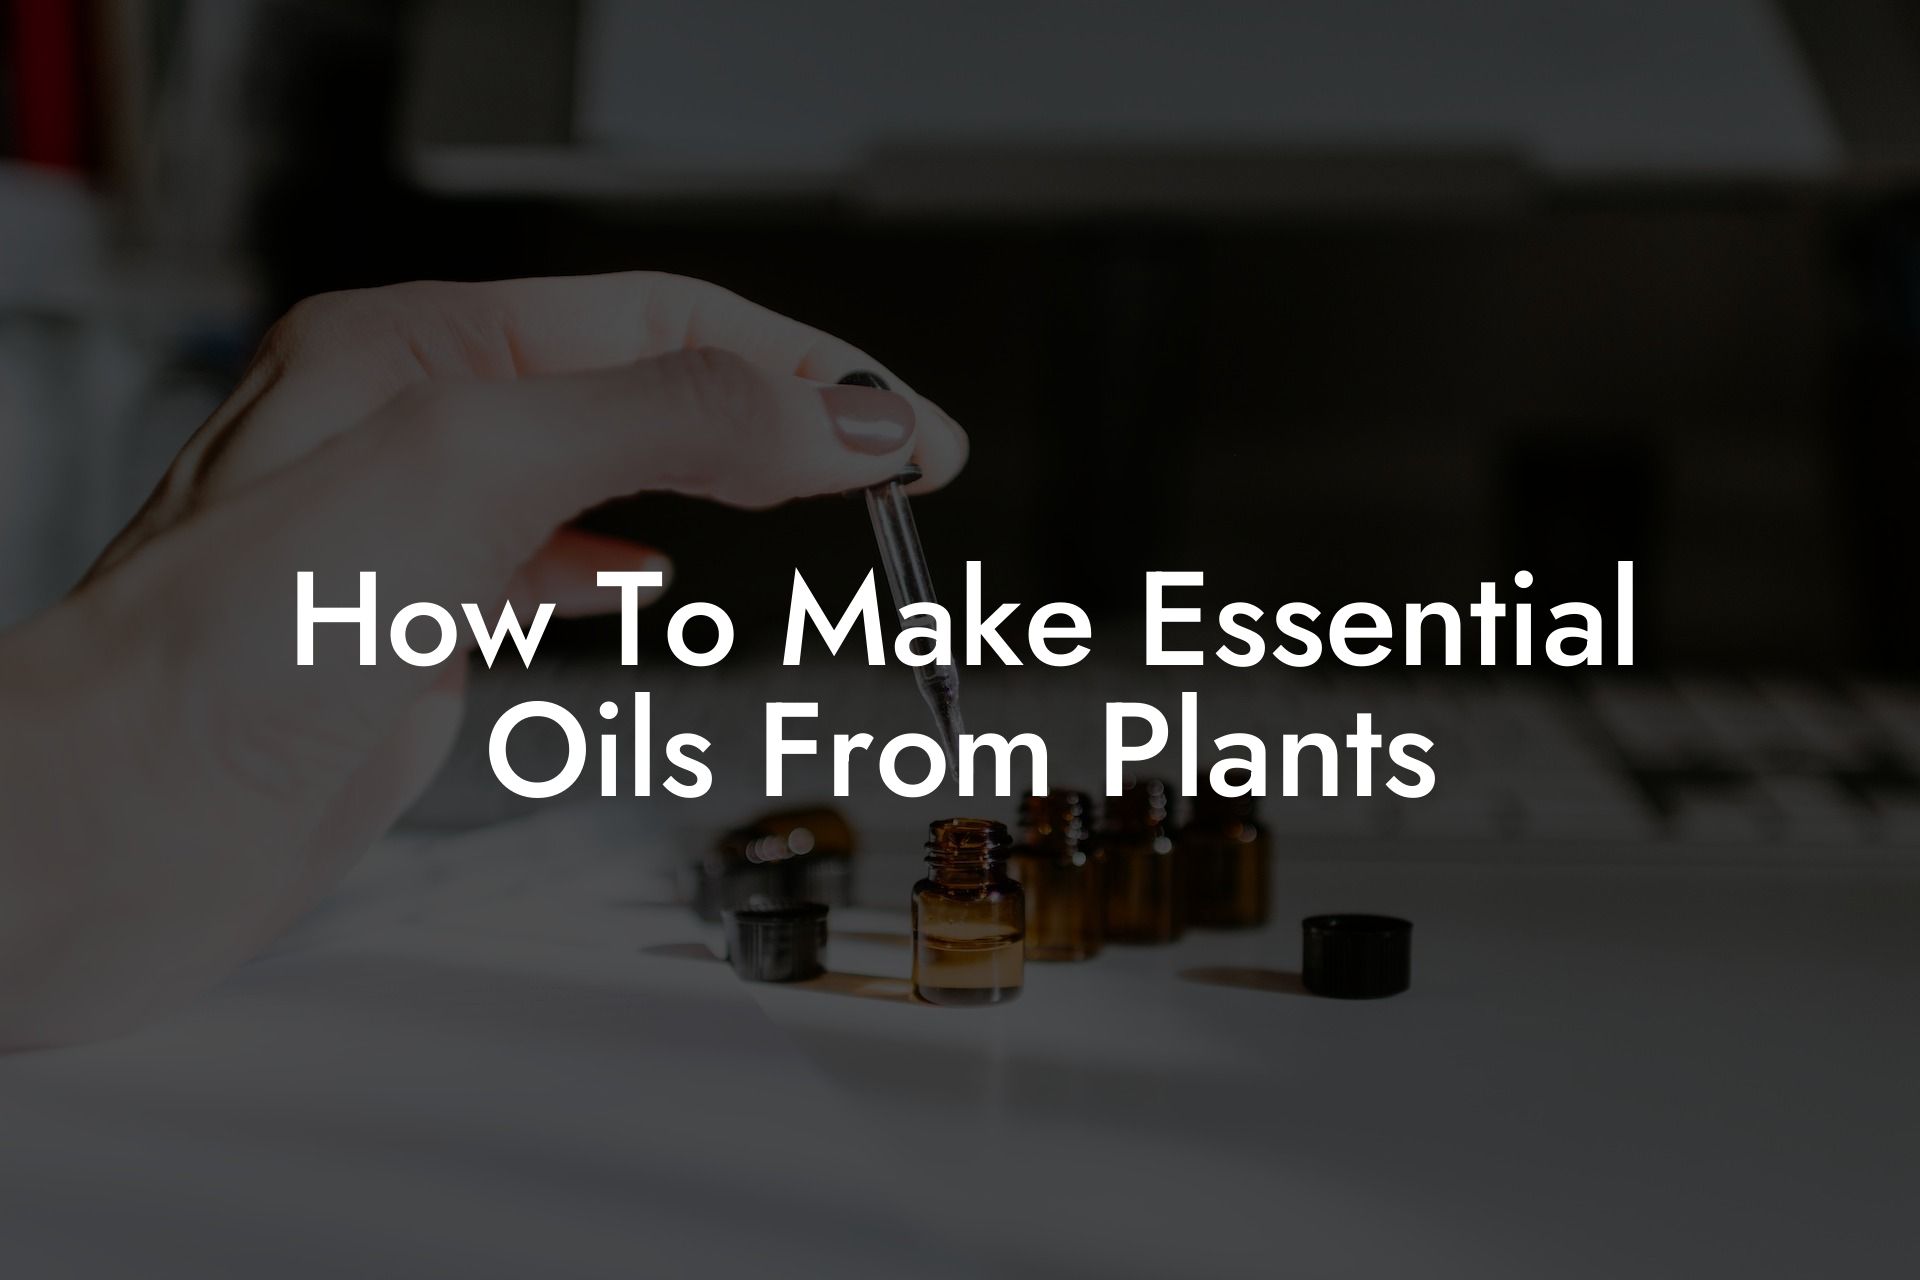 How To Make Essential Oils From Plants